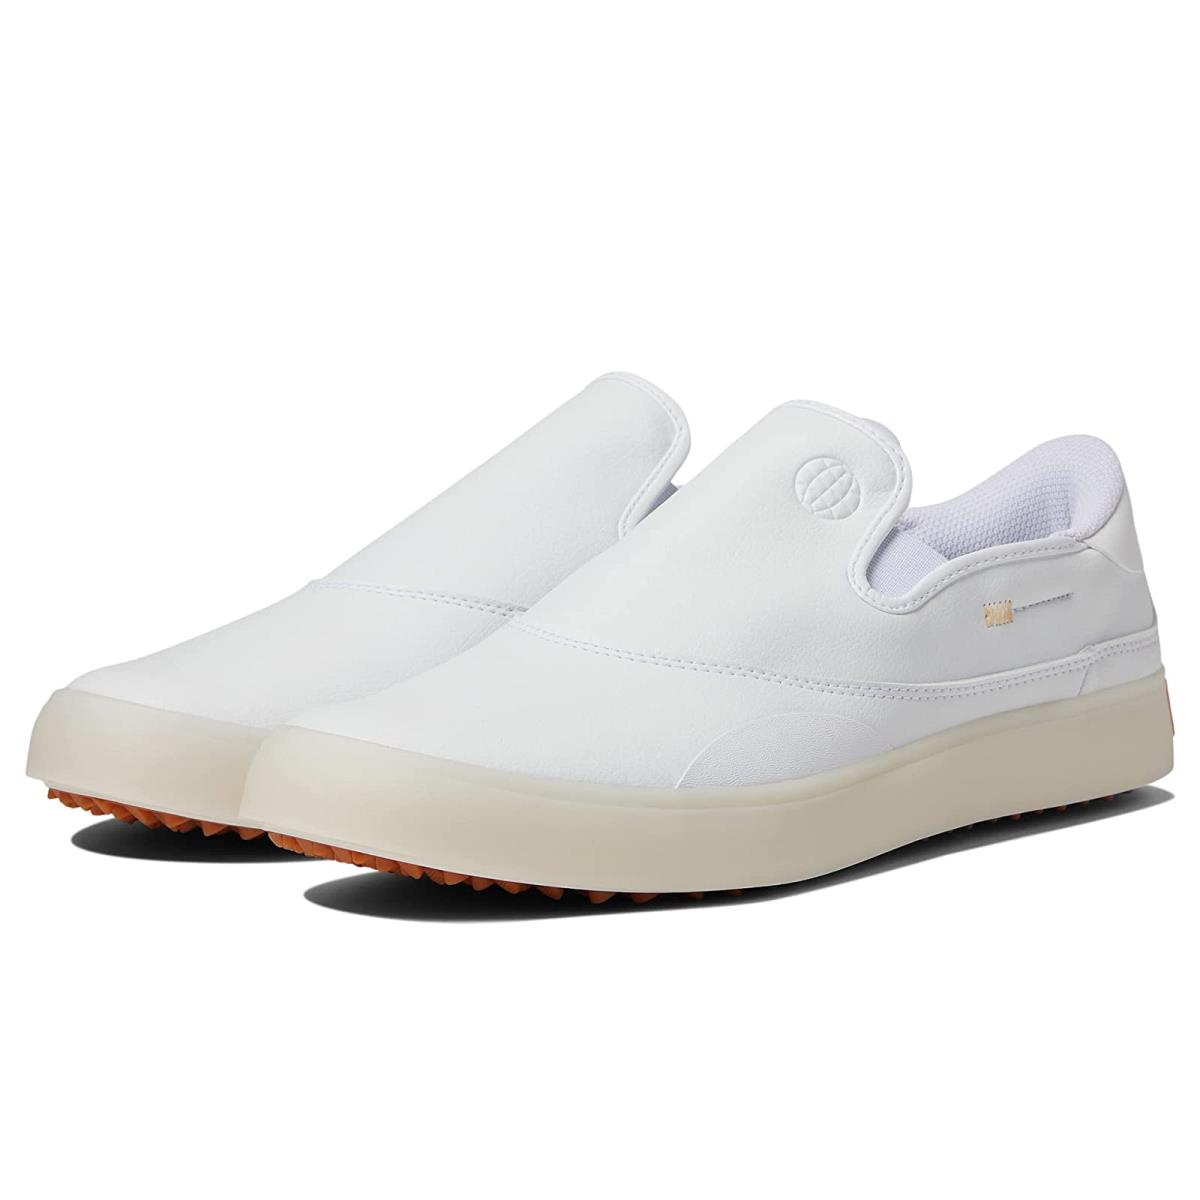 Man`s Sneakers Athletic Shoes Adidas Golf Matchcourse Footwear White/Pulse Amber/Chalk White